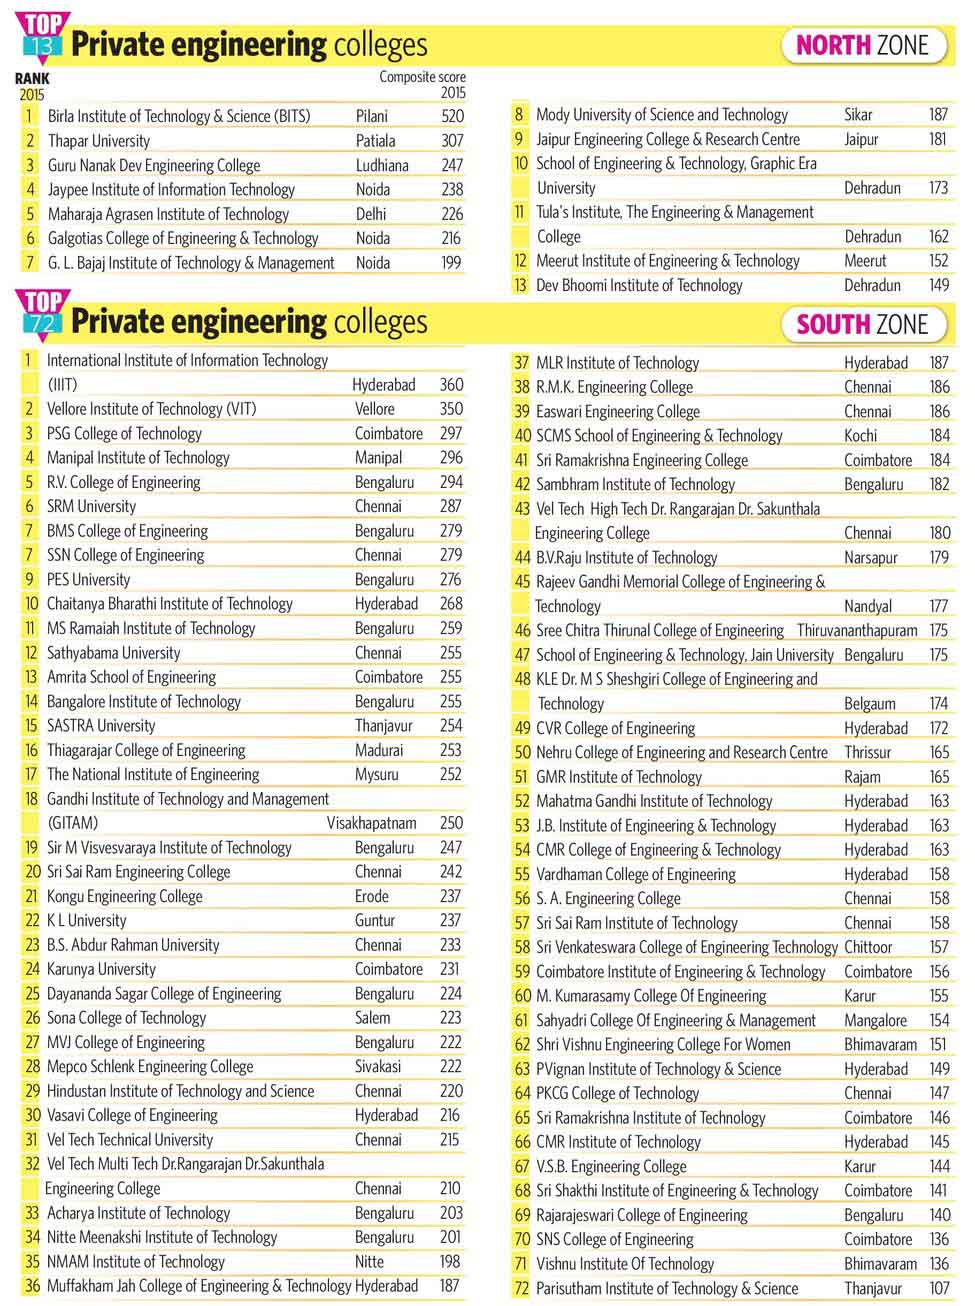 80-TOP-13-Private-engineering-colleges